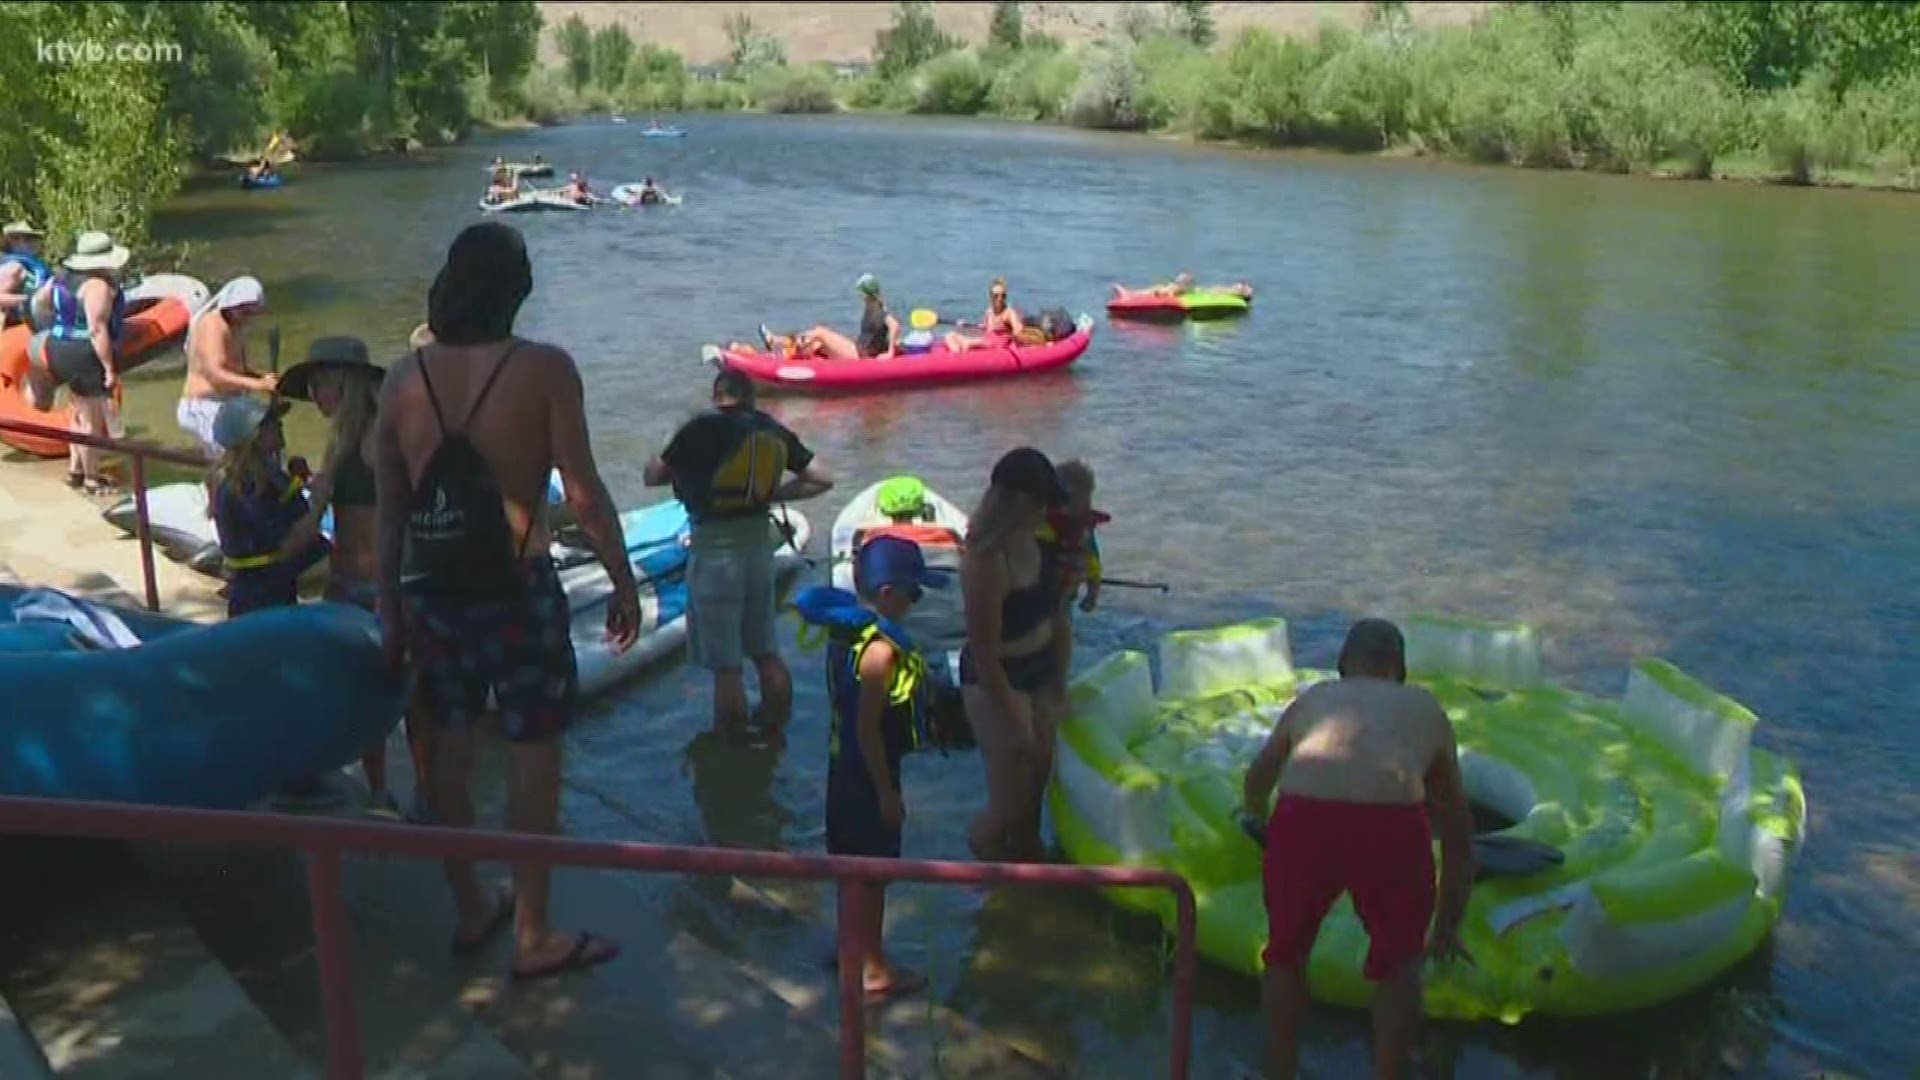 The first official weekend of summer got off to a great start as the Boise River float season got underway.